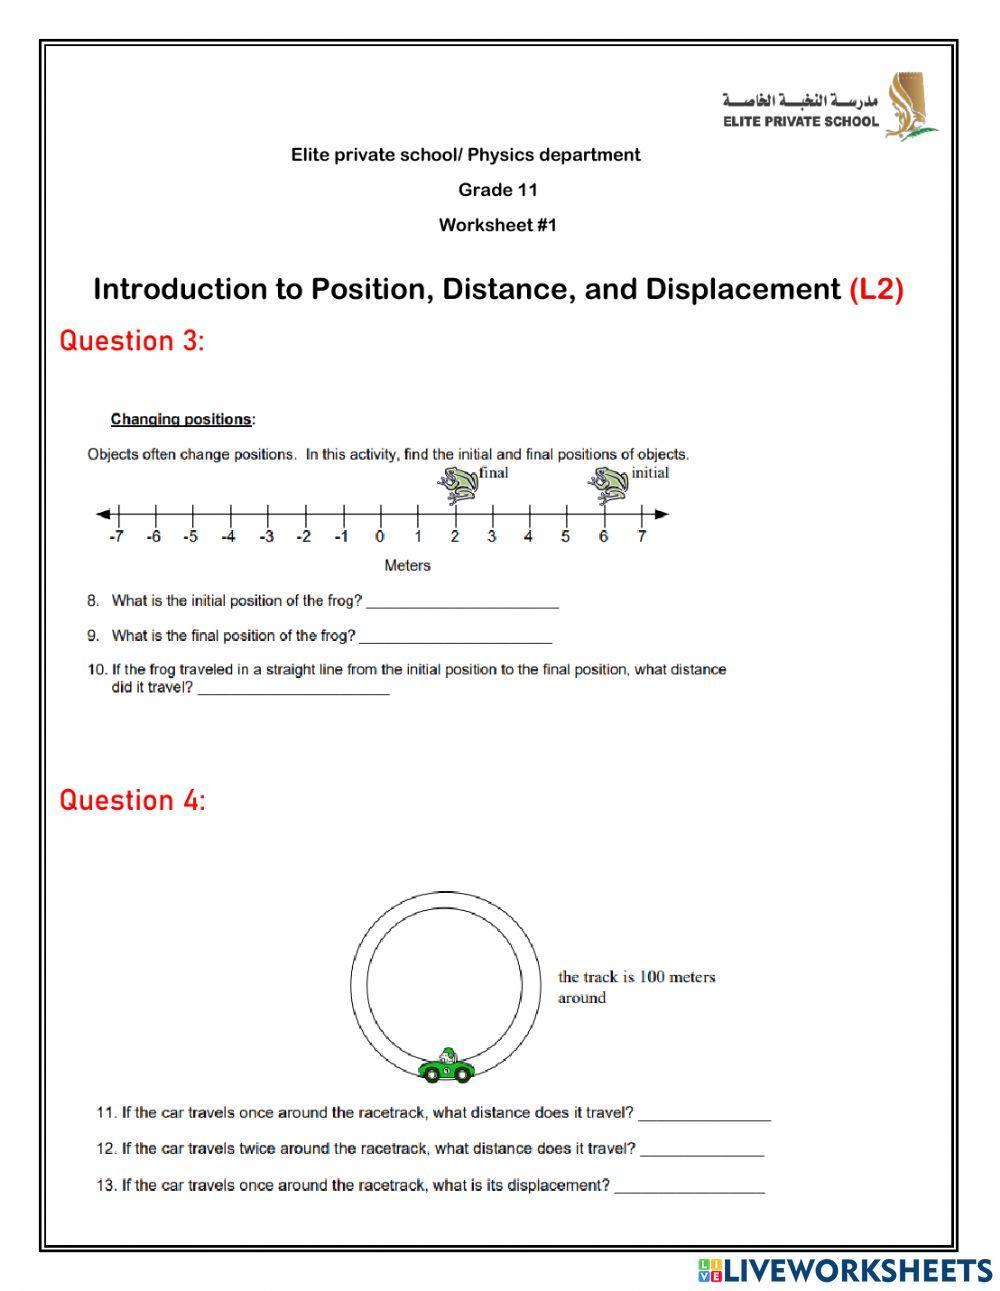 Position, distance and displacement